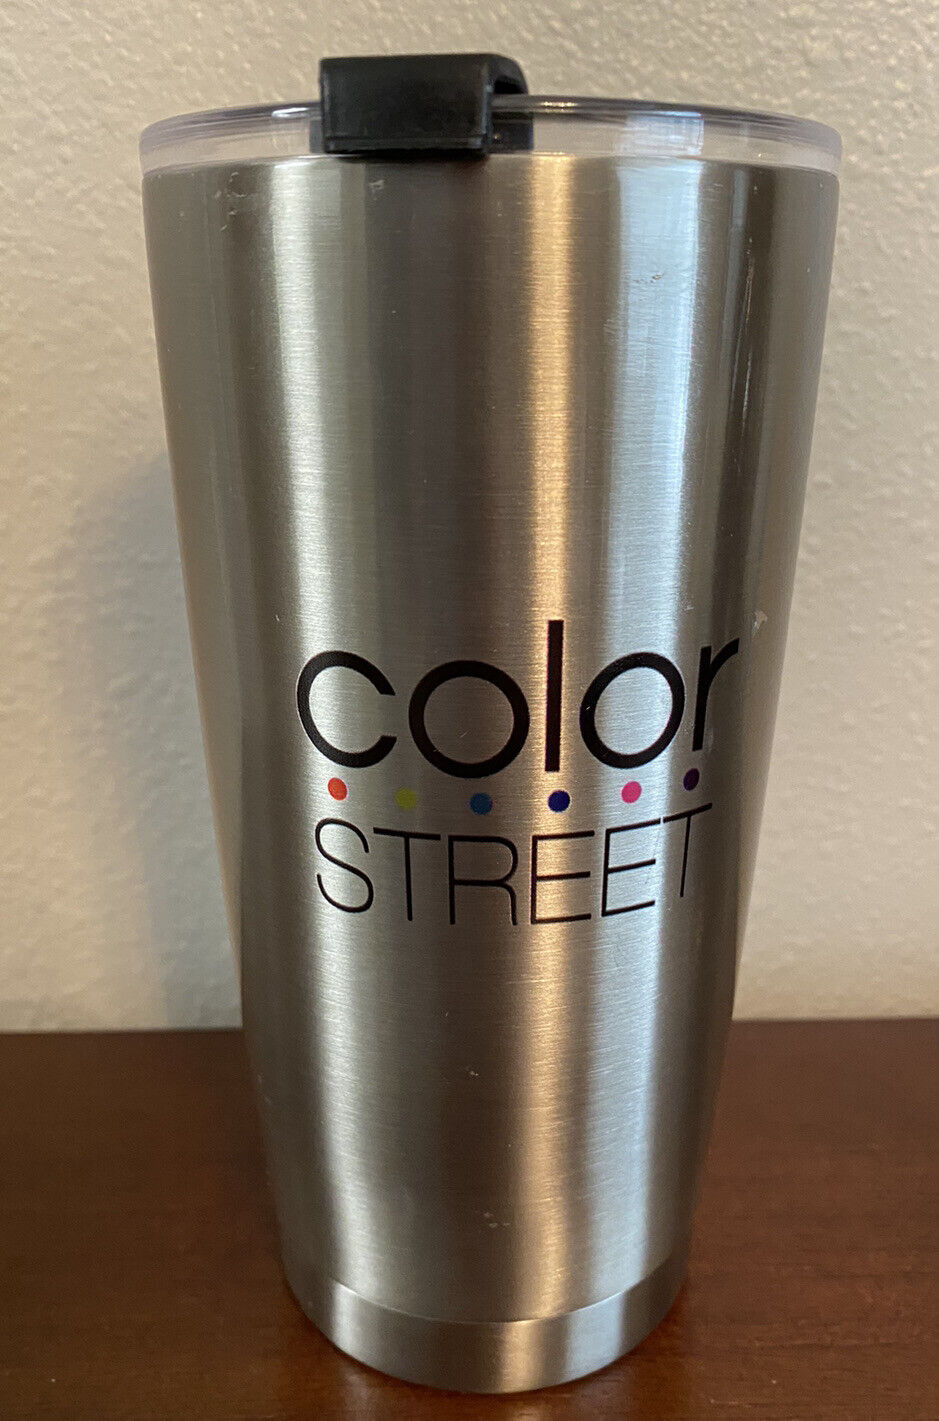 Color Street Silver Cup 7 Inches Tall With Vented Lid Hot & Cold Beverages-used